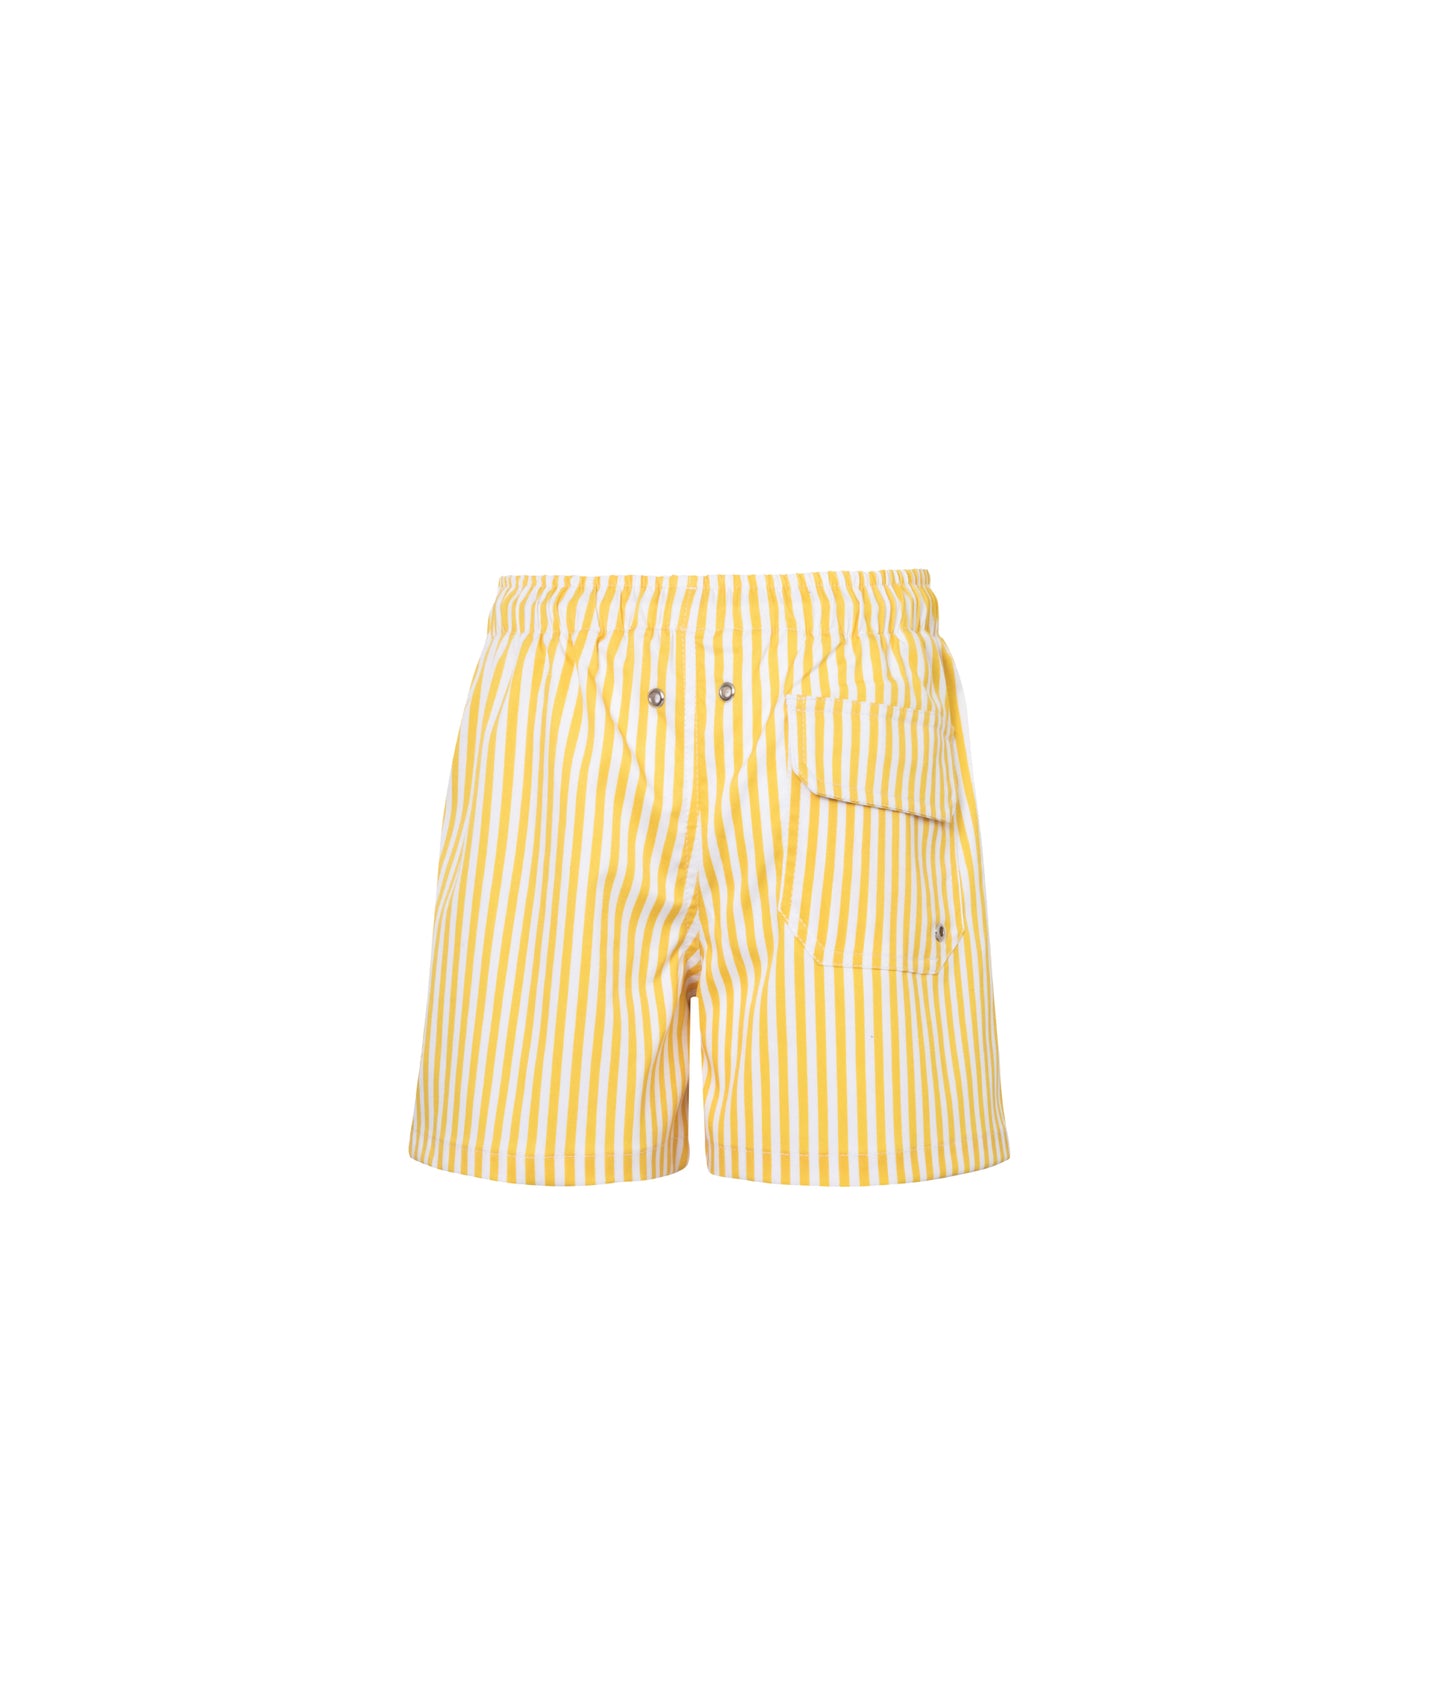 Load image into Gallery viewer, Verdelimon - Swim Trunk - Limones Loulou - Yellow Stripes Loulou - Back
